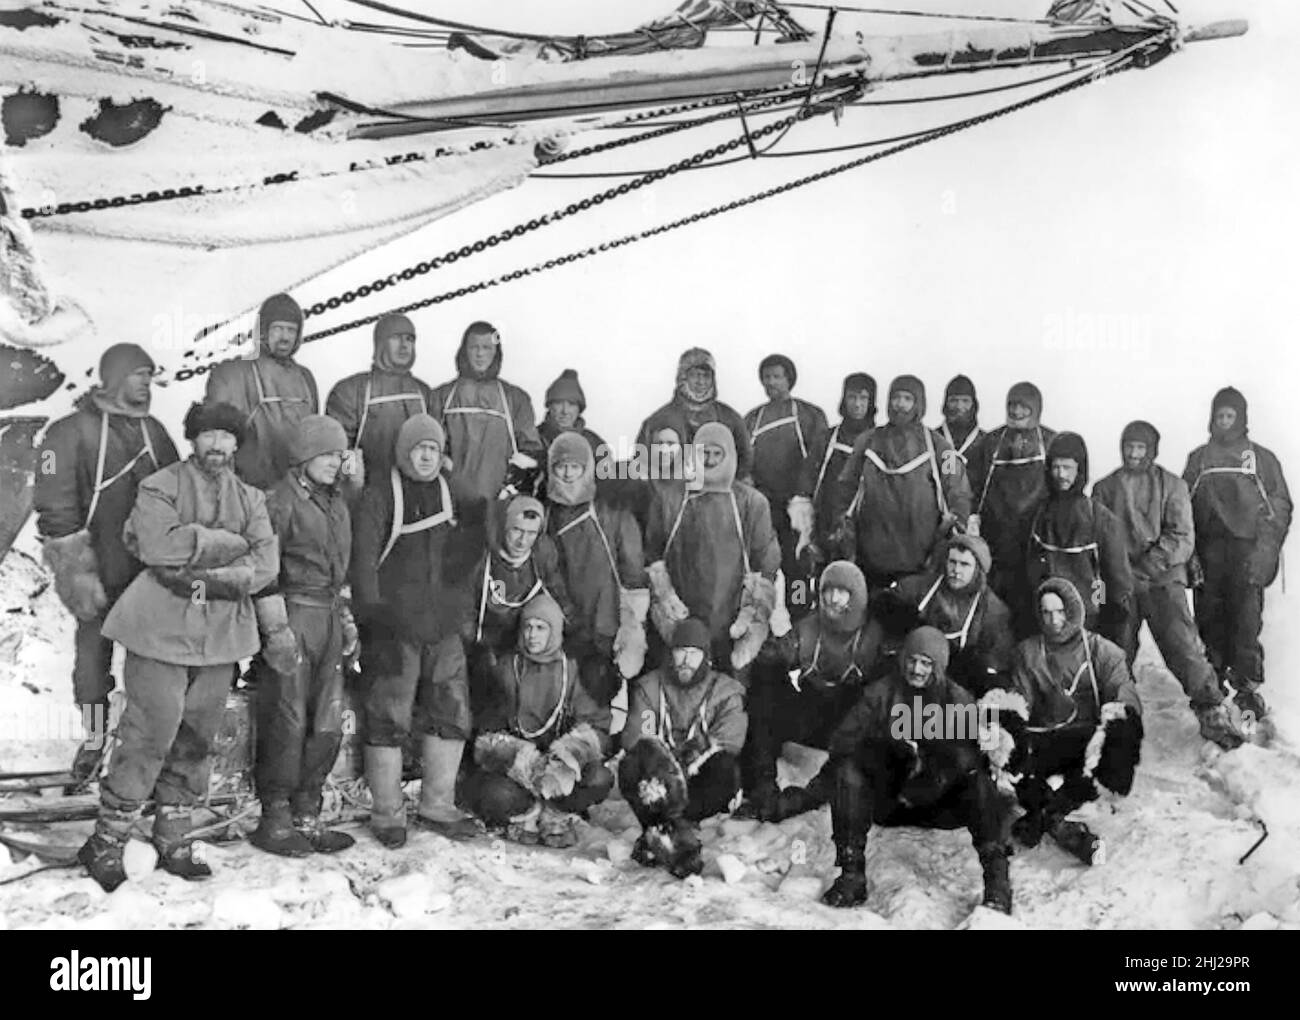 THE ENDURANCE crew during Robert Shackleton's Imperial Trans-Antarctic Expedition in 1916. Photo: Frank Hurley Stock Photo